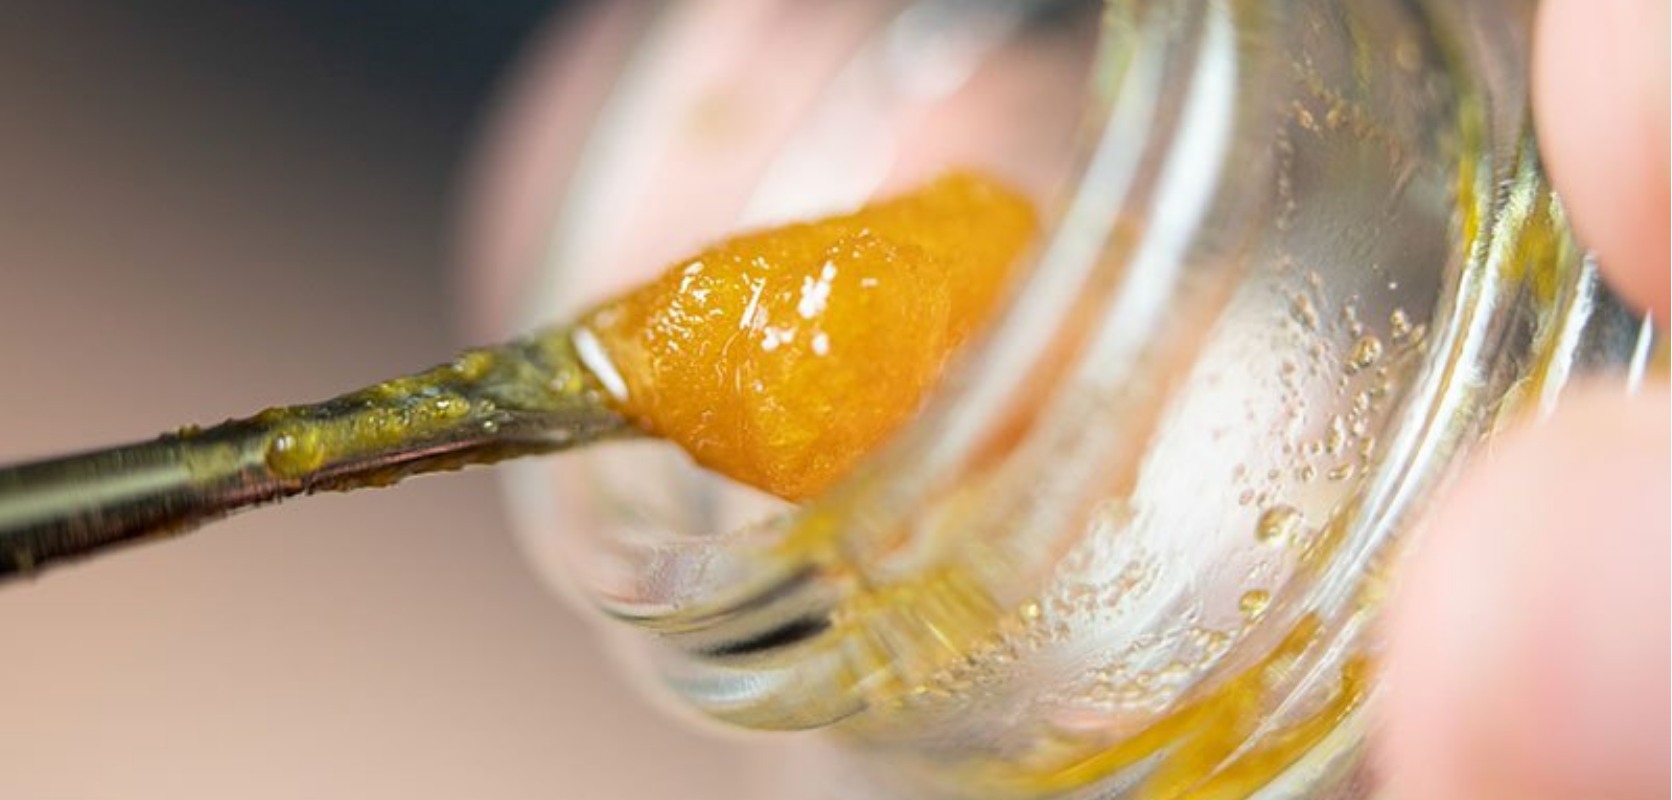 You are wondering where to buy THC resin. But, what does THC resin actually refer to and why is it so important to choose a reliable online dispensary?